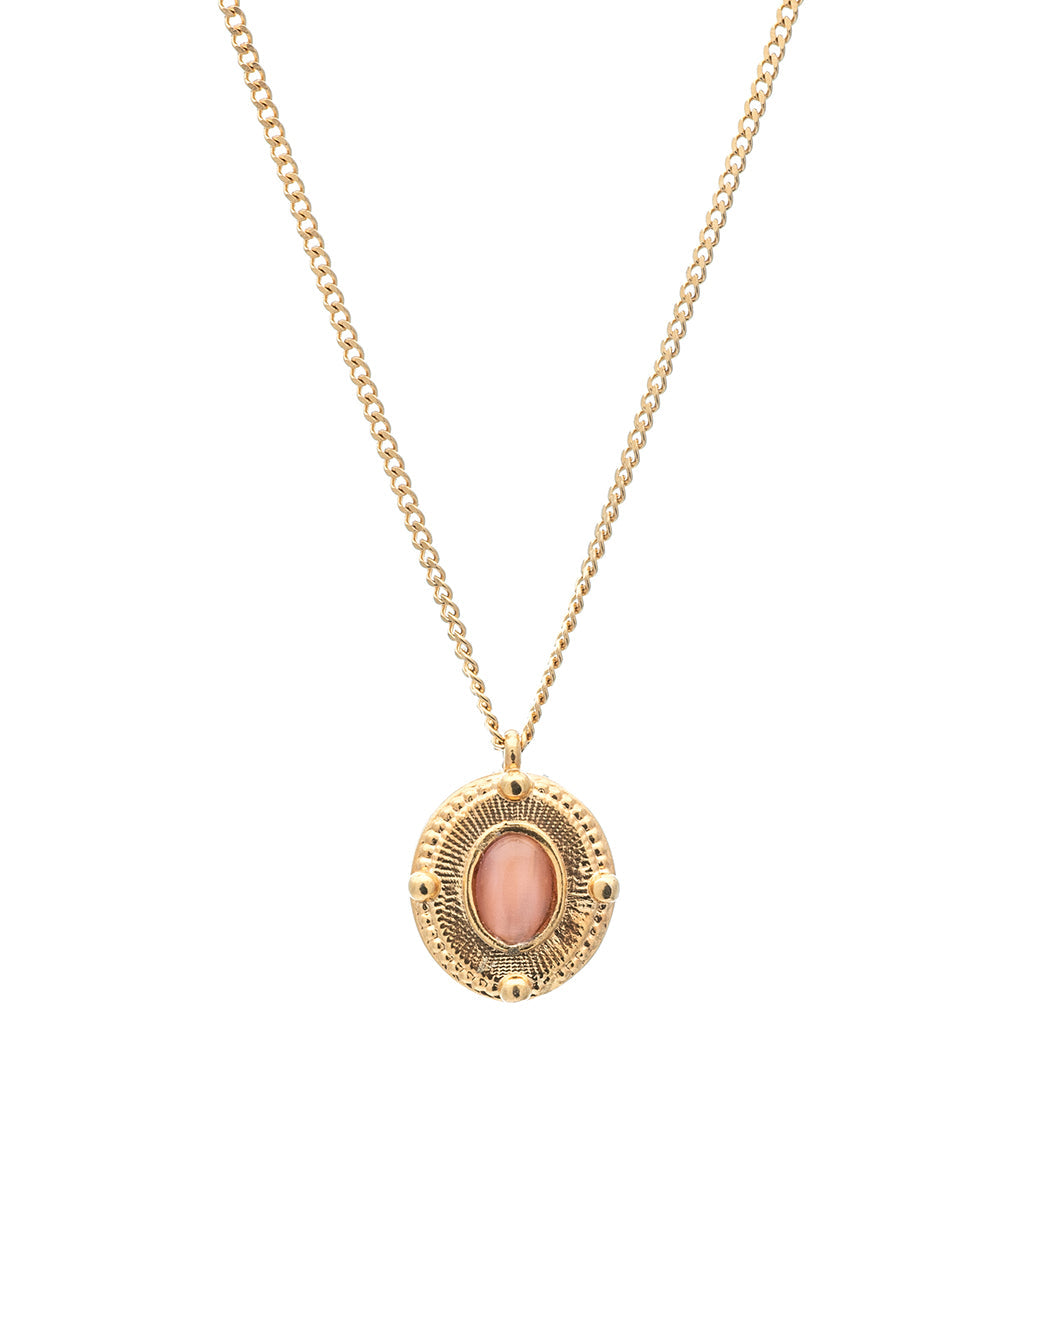 Mademoiselle necklace